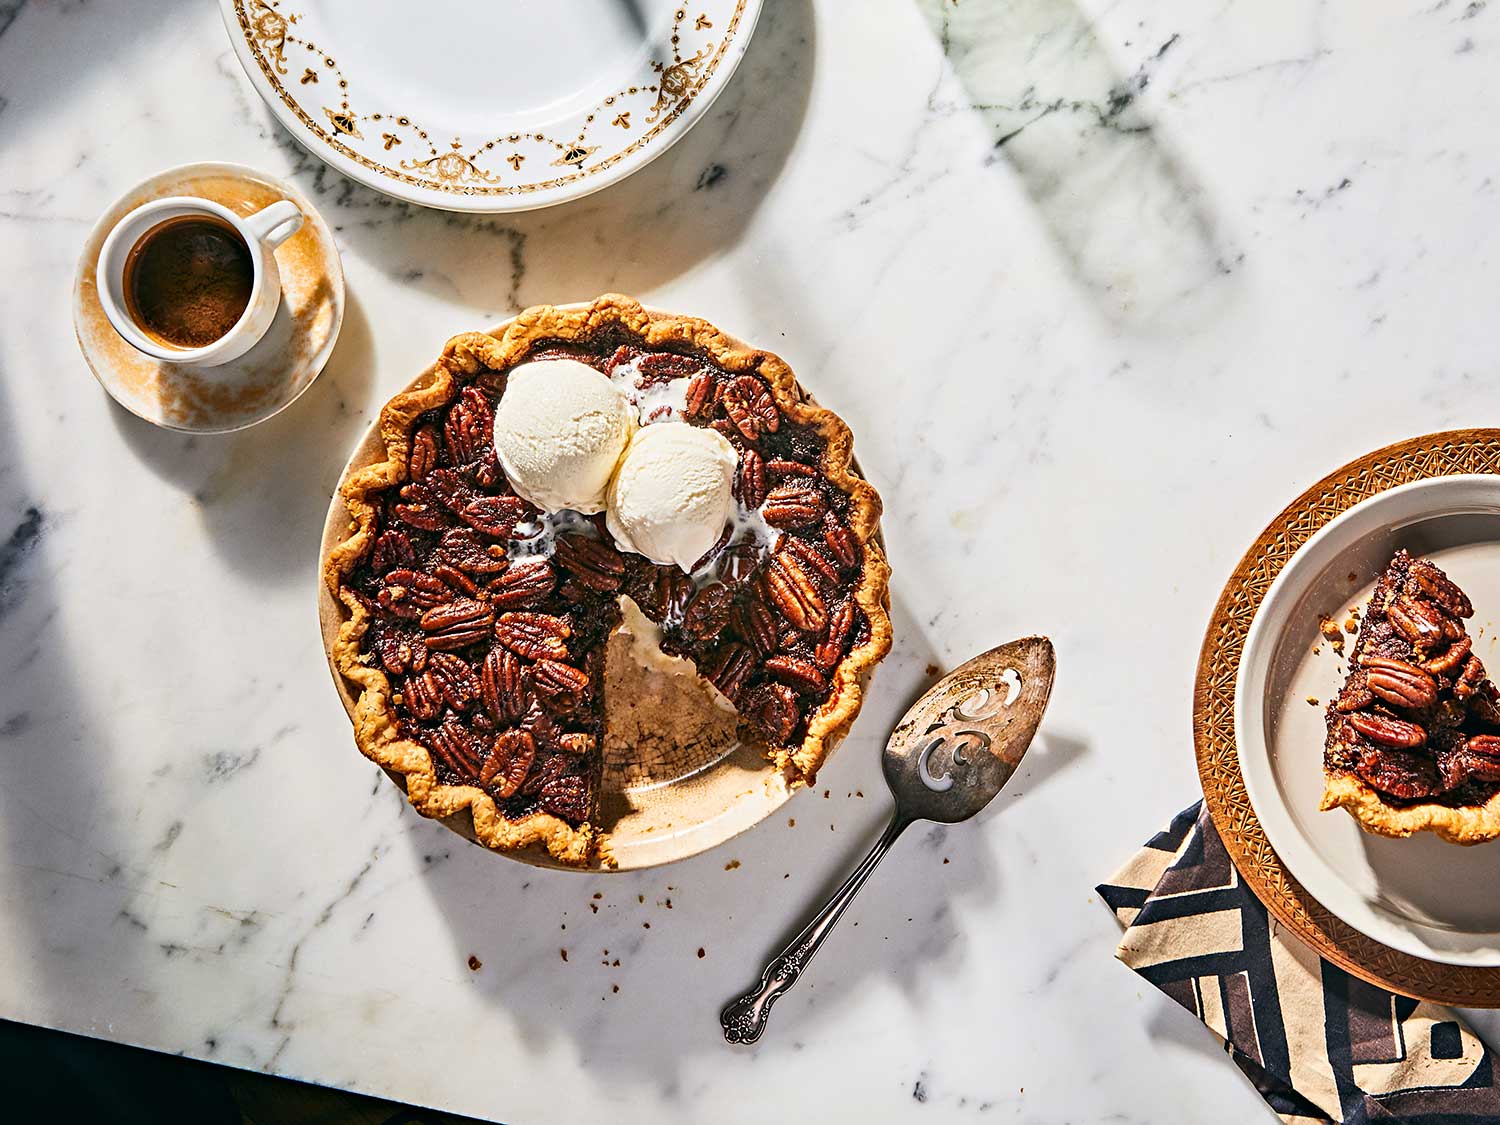 This pecan pie combines chocolate and bourbon in the most decadent way